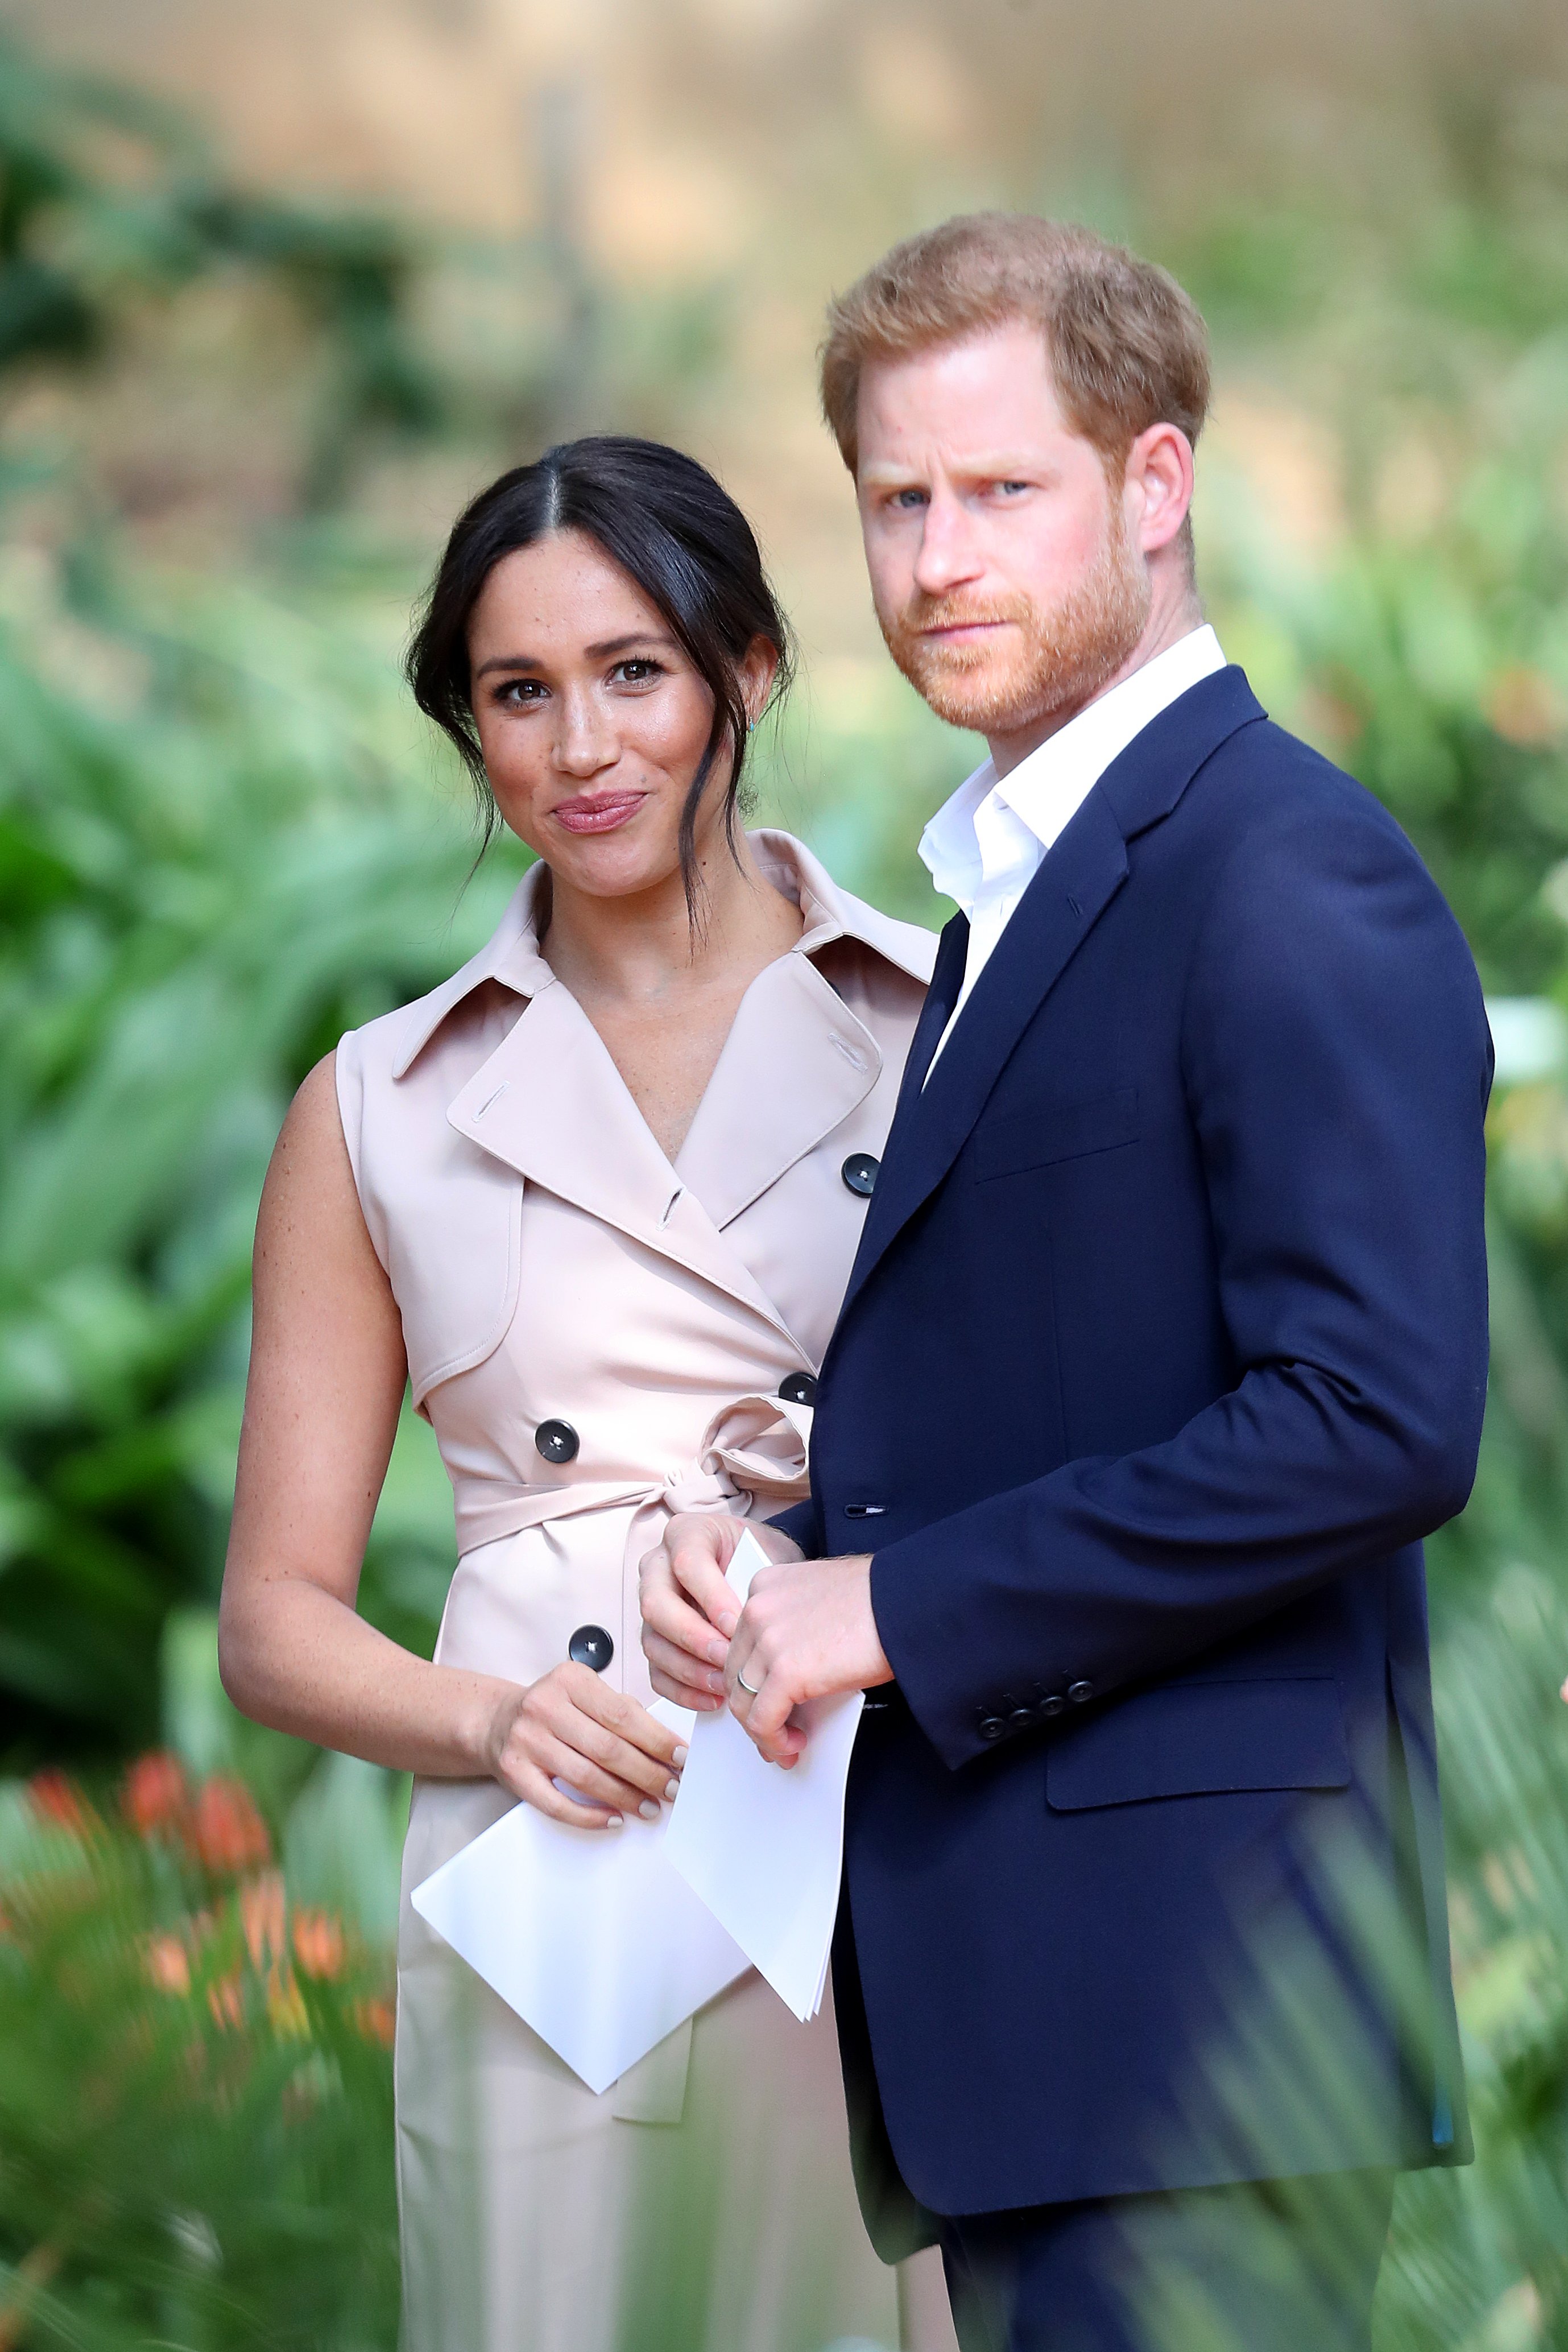 Prince Harry & Meghan Markle at a Creative Industries and Business Reception on Oct. 02, 2019 in South Africa | Photo: Getty Images 